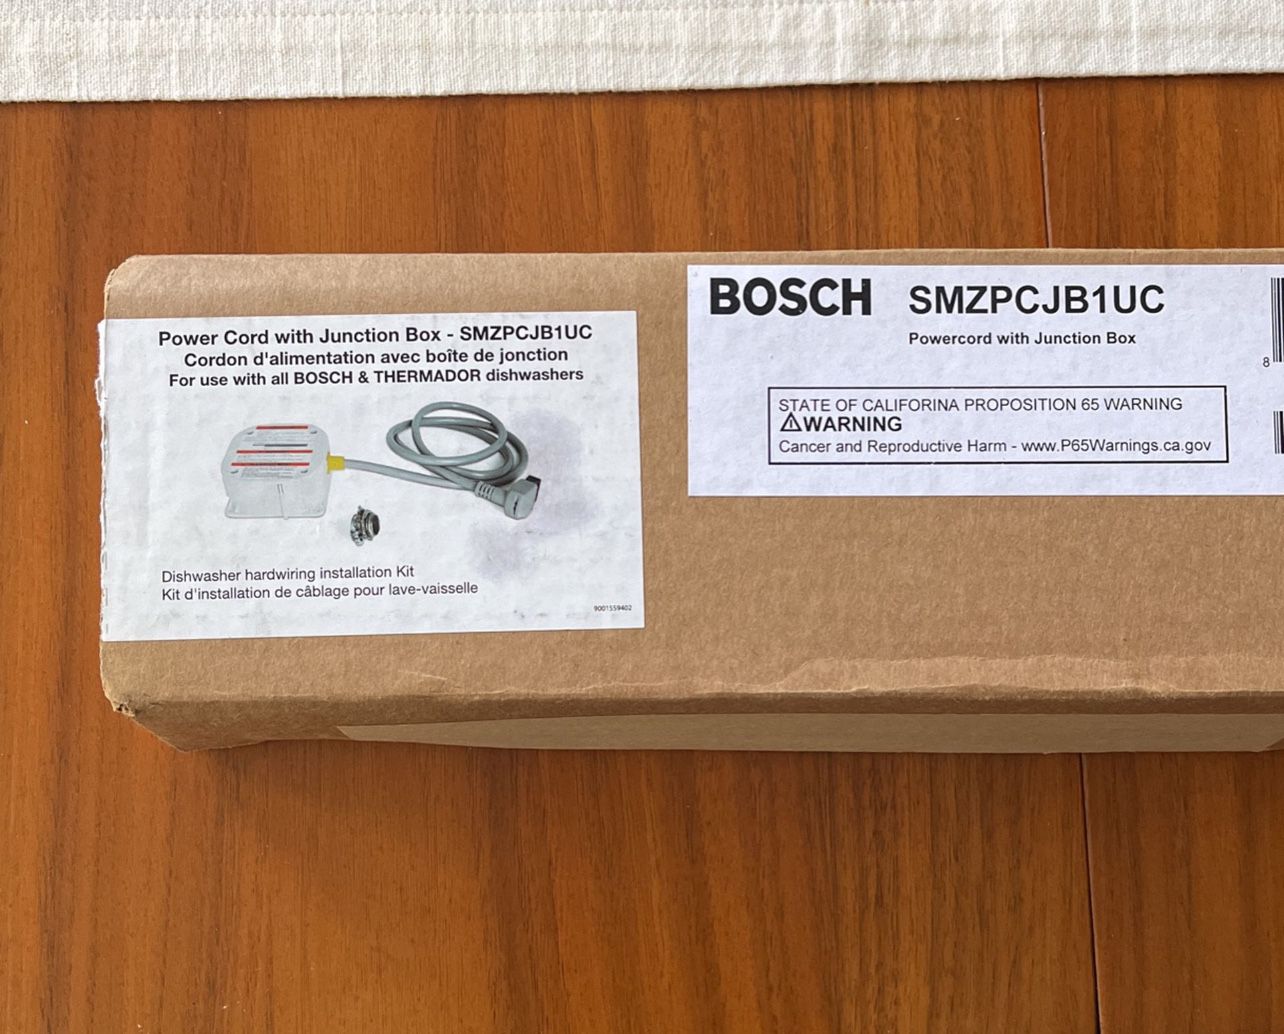 BOSCH POWER CORD AND JUNCTION BOX